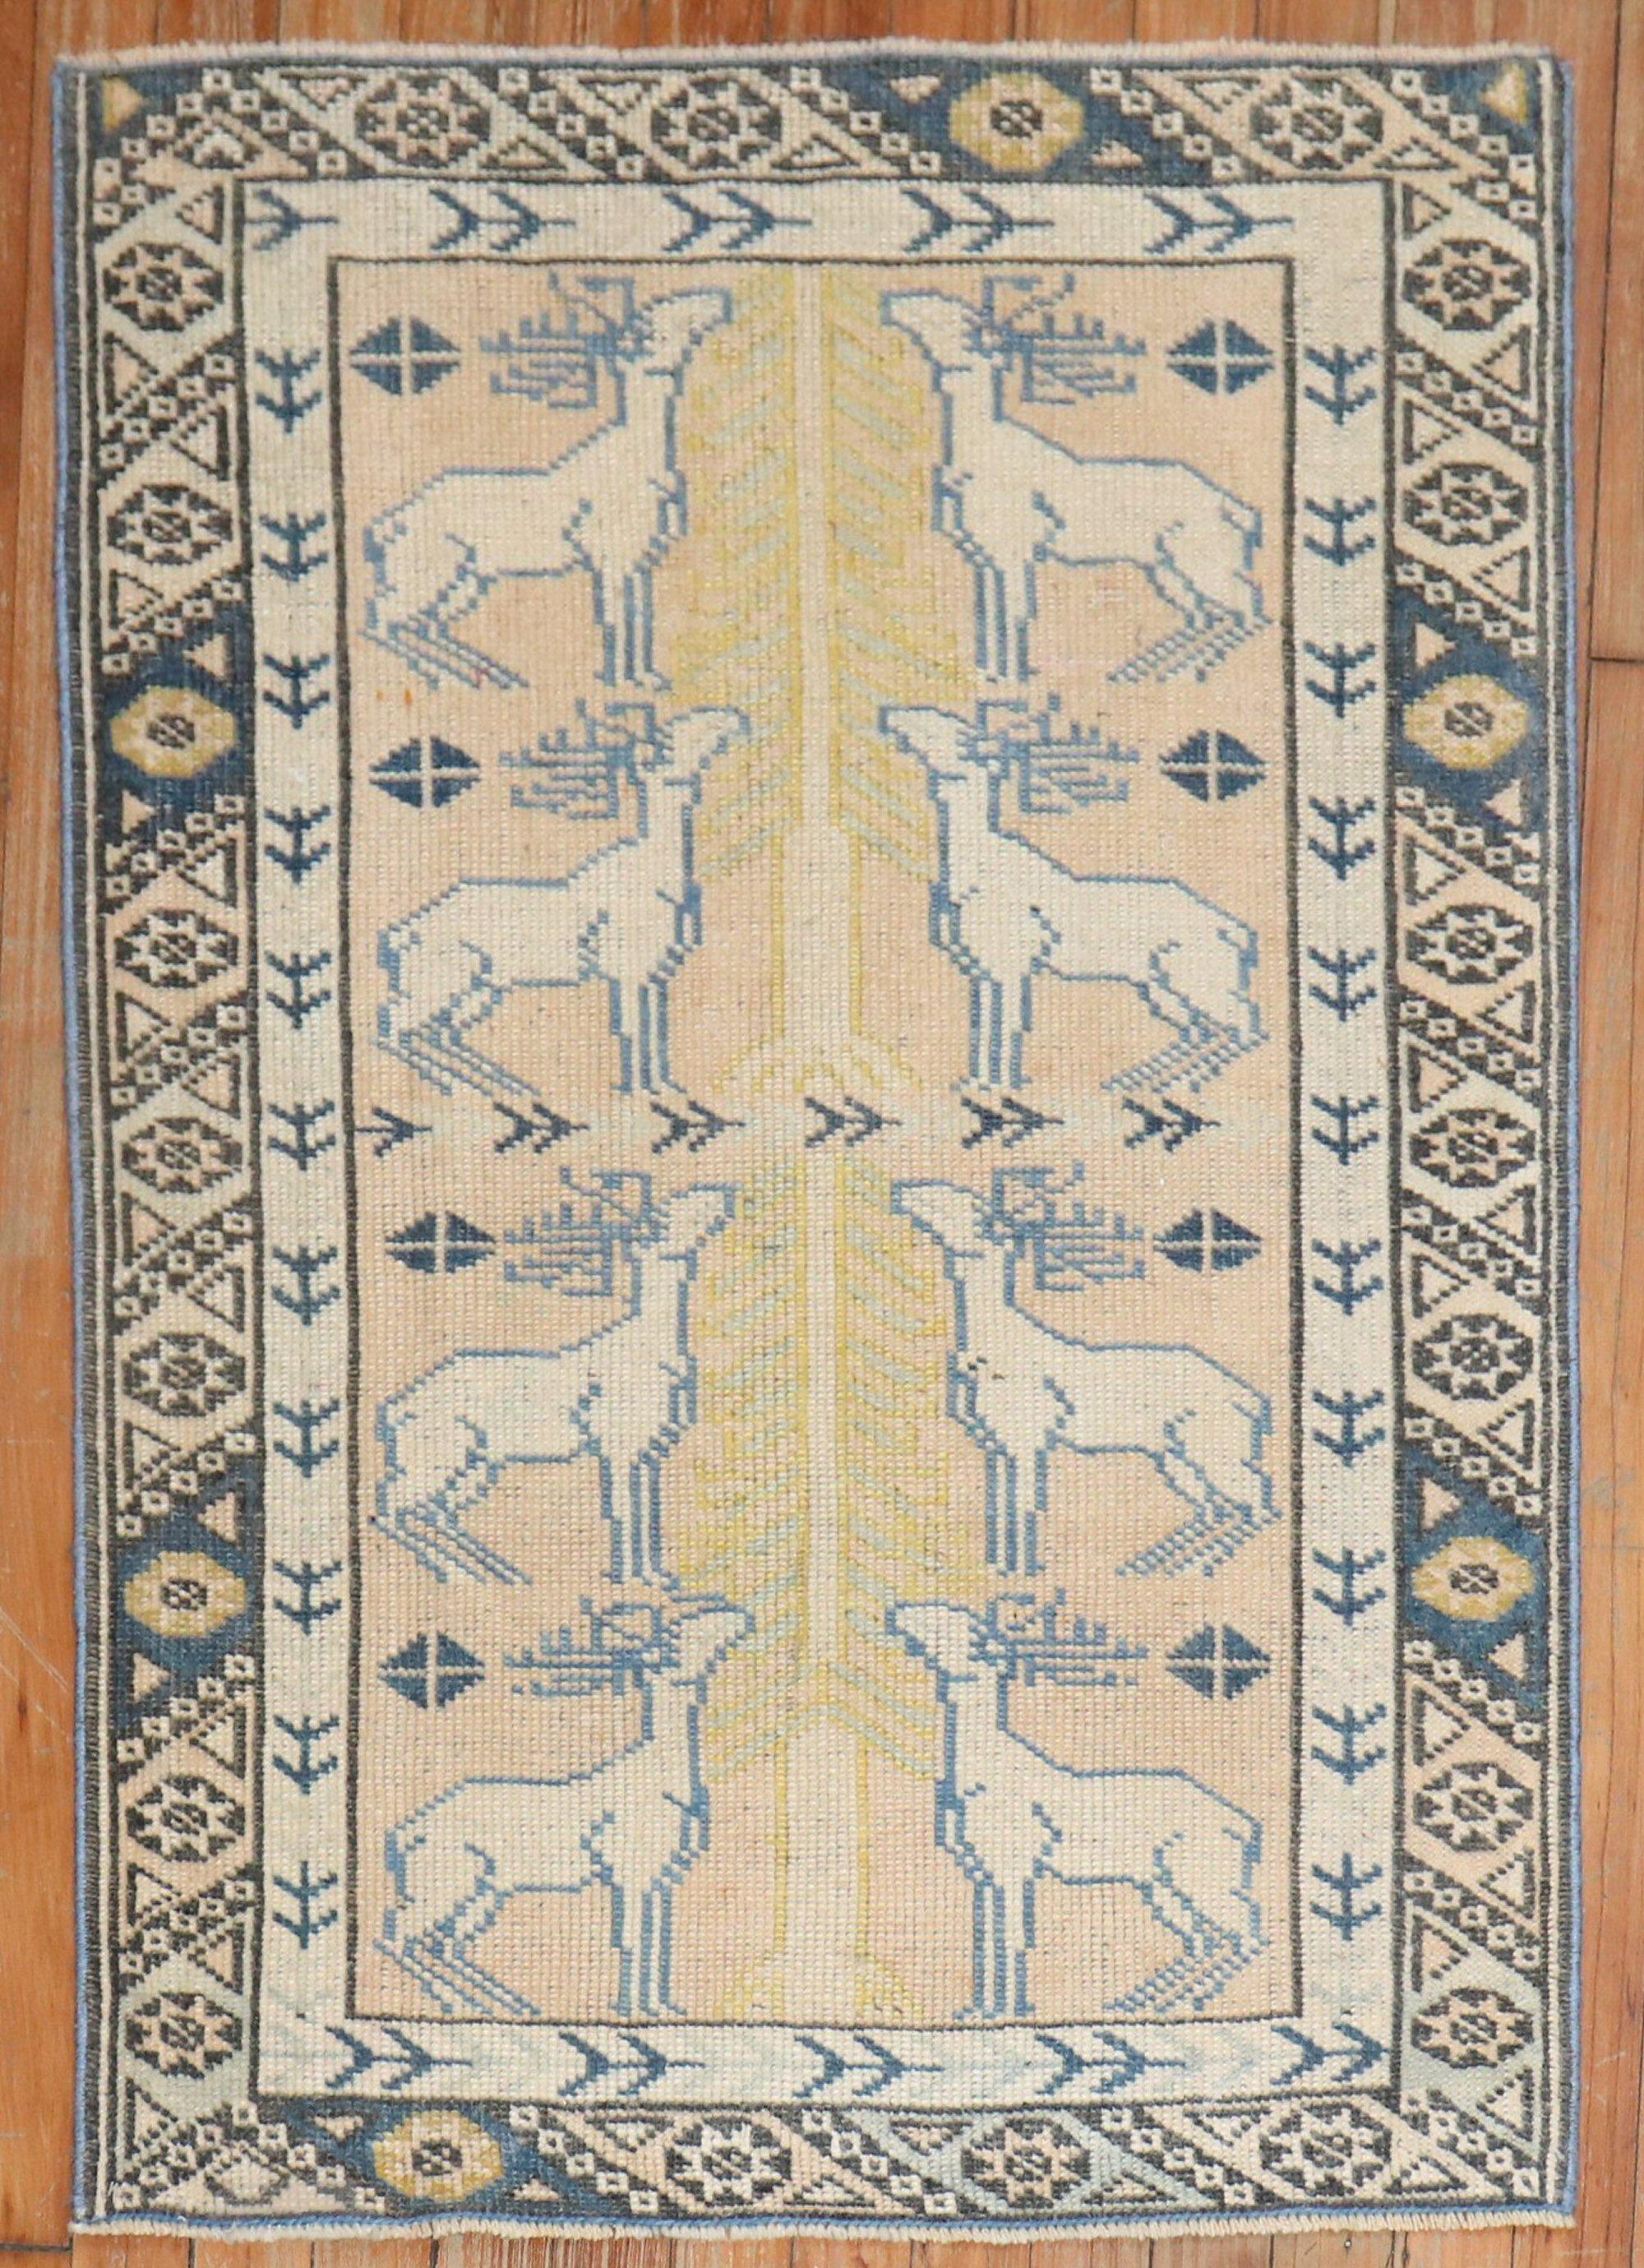 Late 20th-century Turkish Anatolian Pictorial rug with 8 jolly full Reindeers.

Measures: 2'5'' x 3'7''.